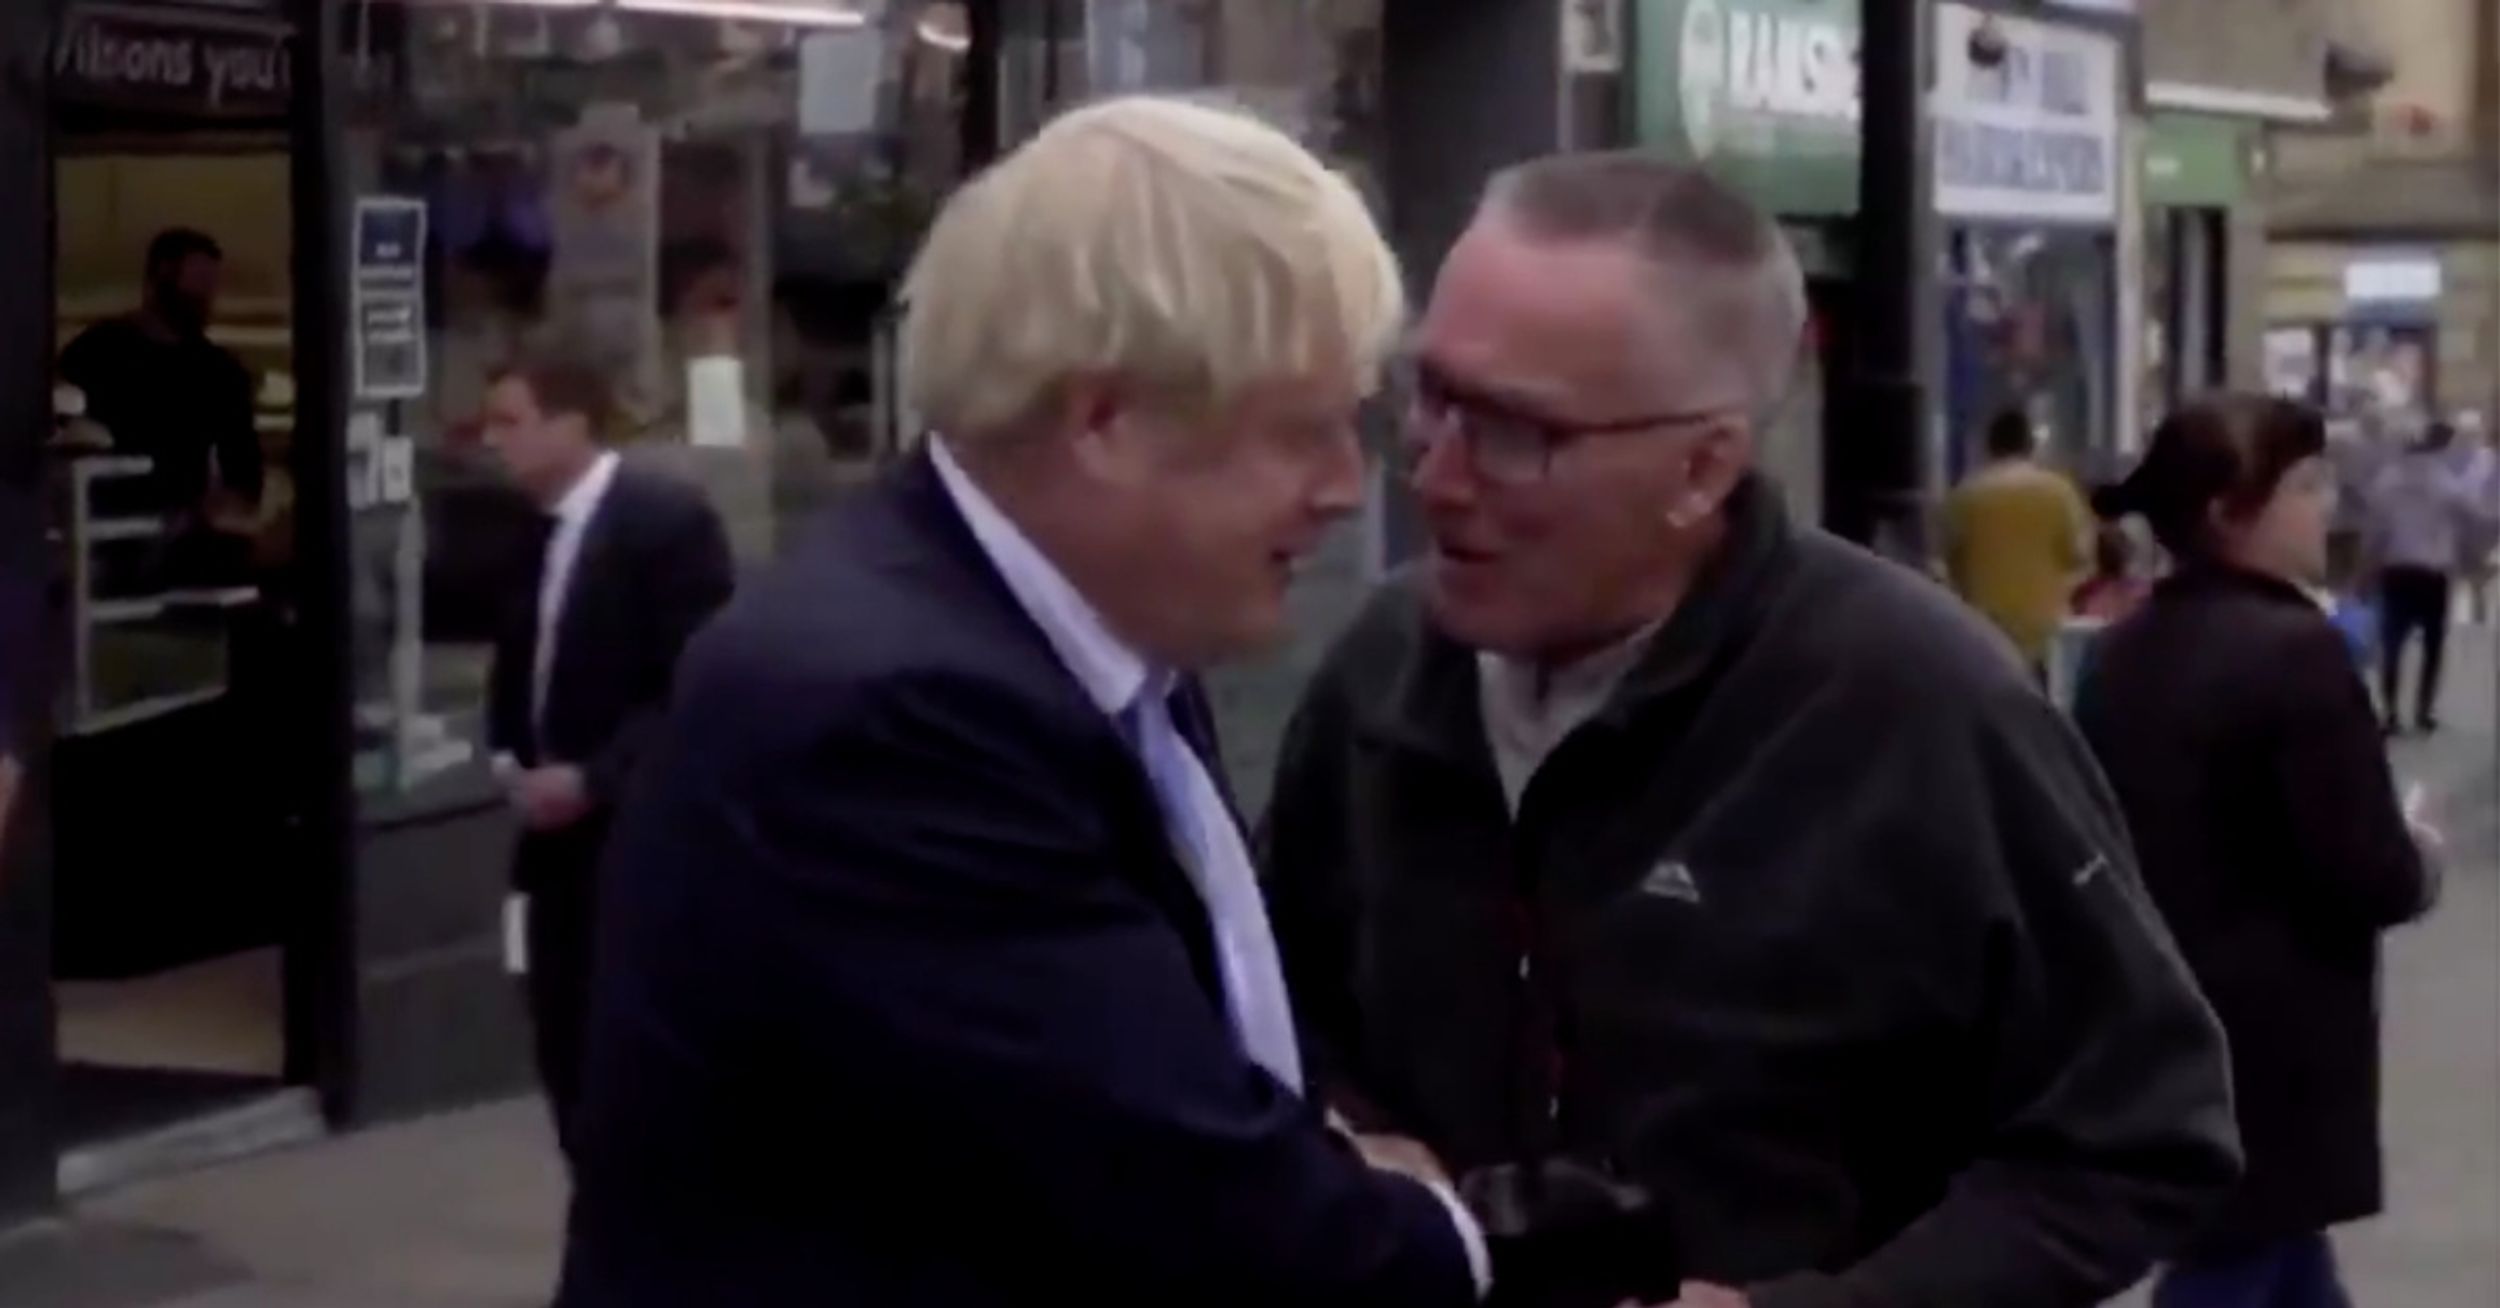 #PleaseLeaveMyTown Trends On Twitter After Very Polite British Man Tells Boris Johnson Off In Viral Video